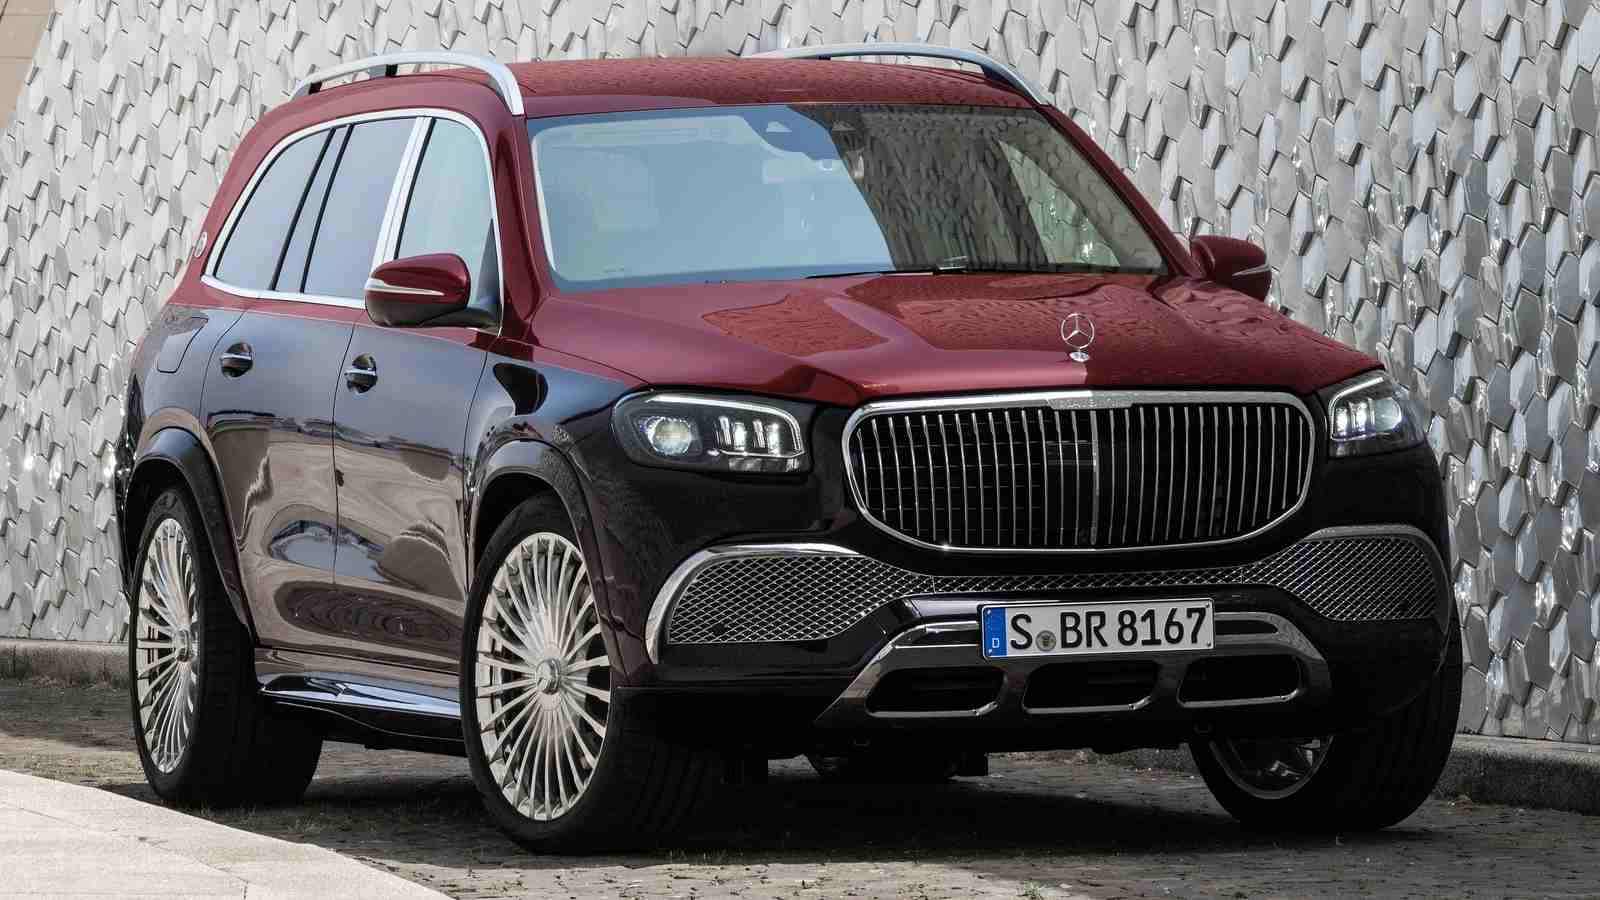 Mercedes Maybach GLS 600 SUV India Launch Highlights: Prices For Uber Luxury SUV Start At Rs 2.43 Crore Technology News, Firstpost